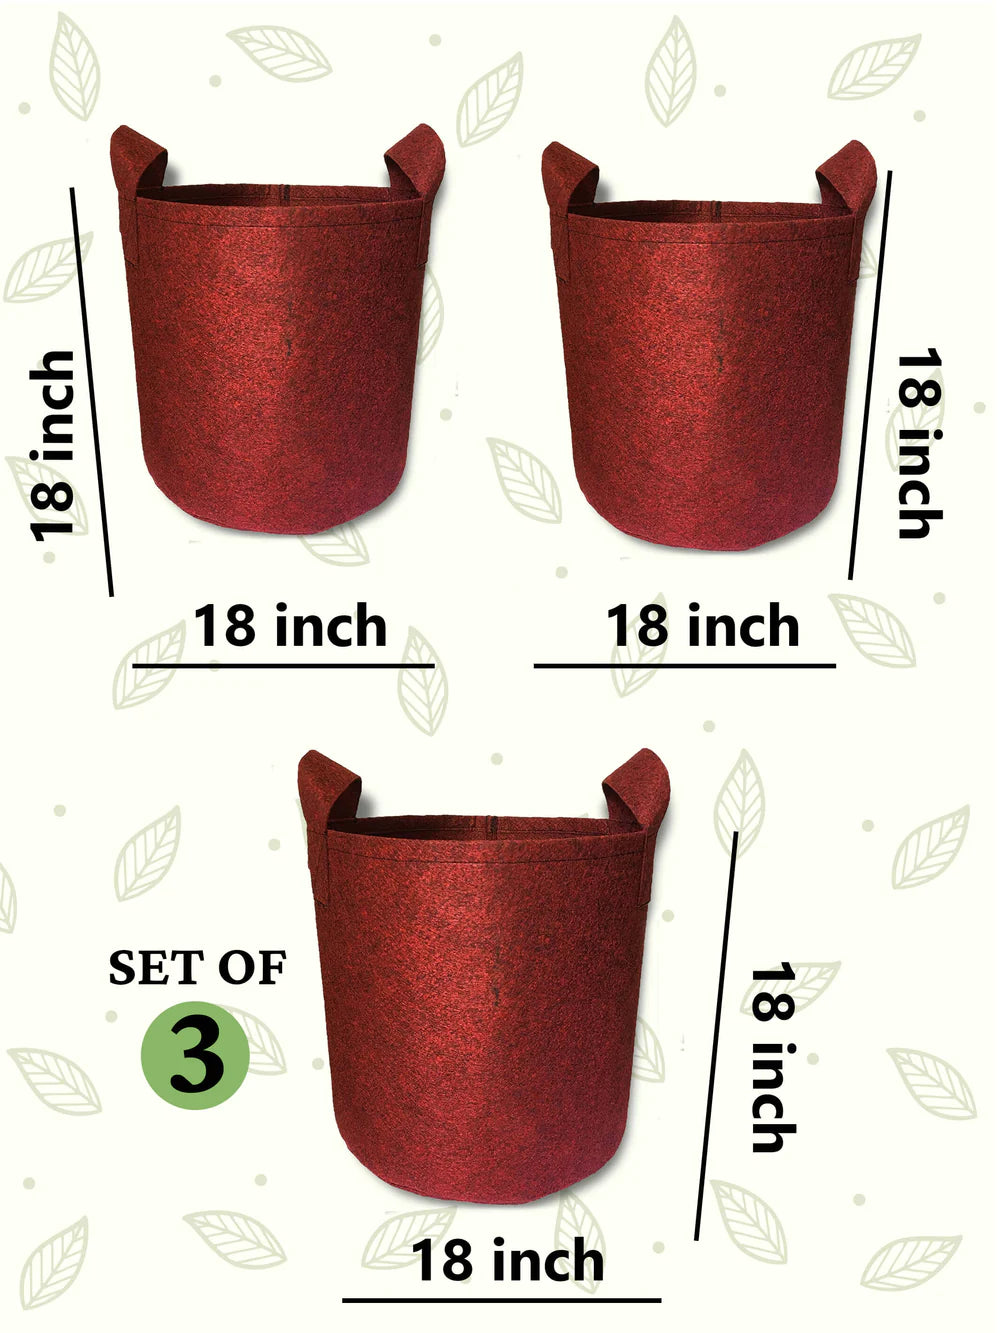 Fabric Grow bags for indoor plants (set of 3)- Eco friendly gifts